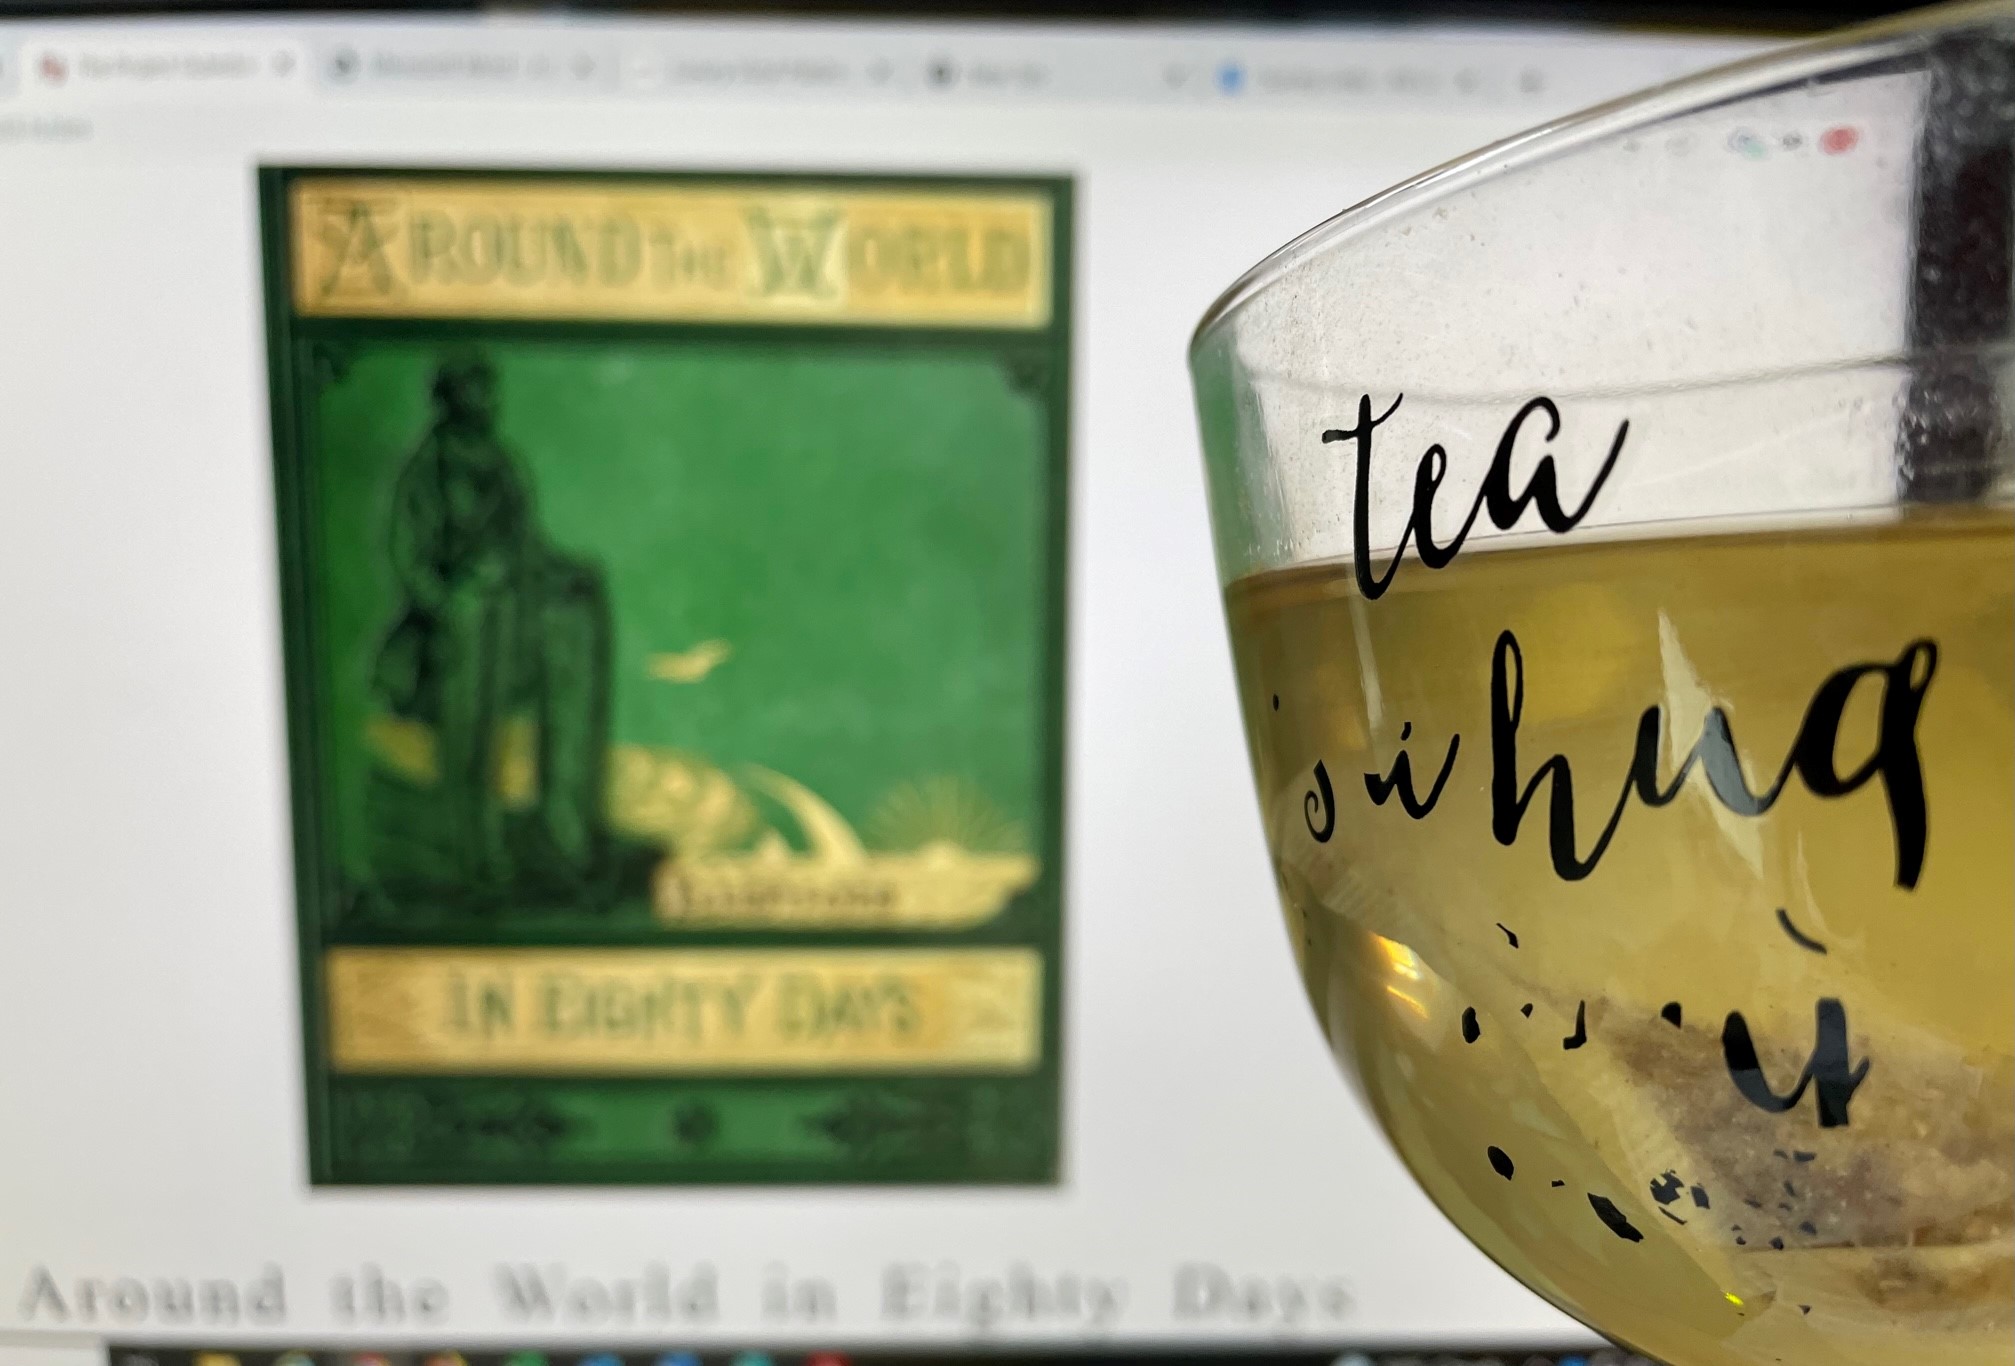 Cover of "Around the World in Eighty Days" with a cup of tea